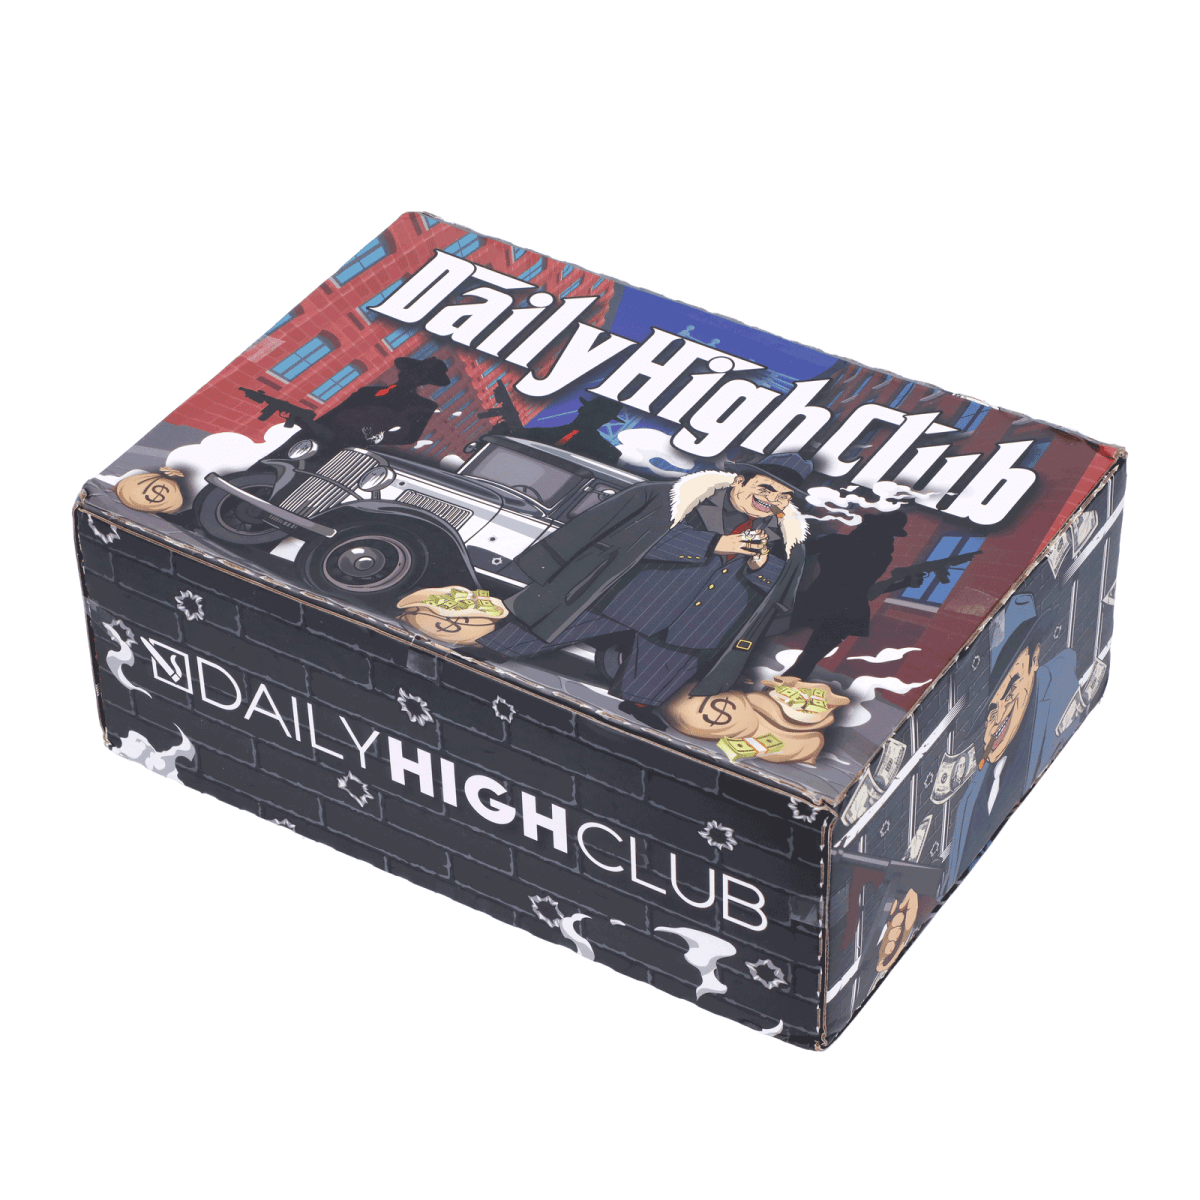 Daily High Club subscription box "Mobster" Smoking Box